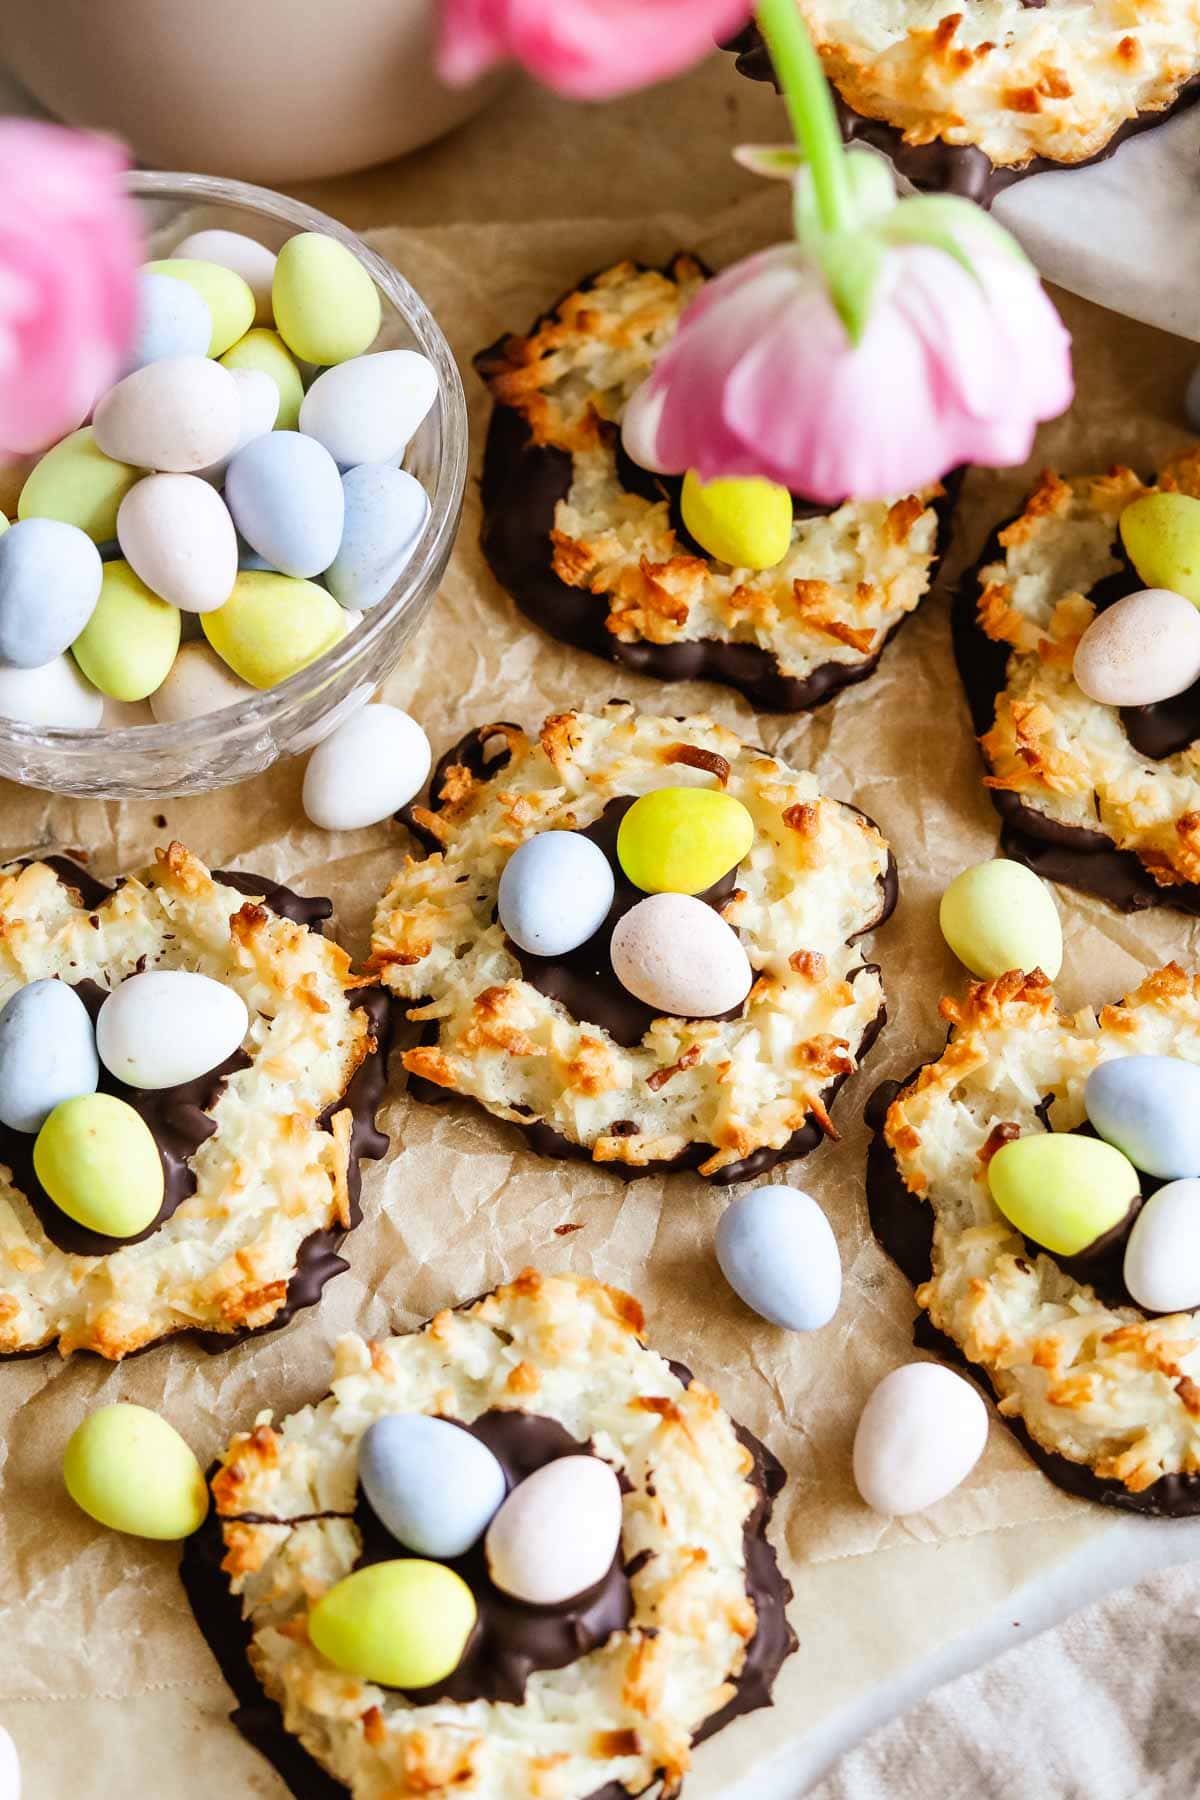 Chocolate coconut macaroon nests with mini Cadbury eggs for Easter and Spring.